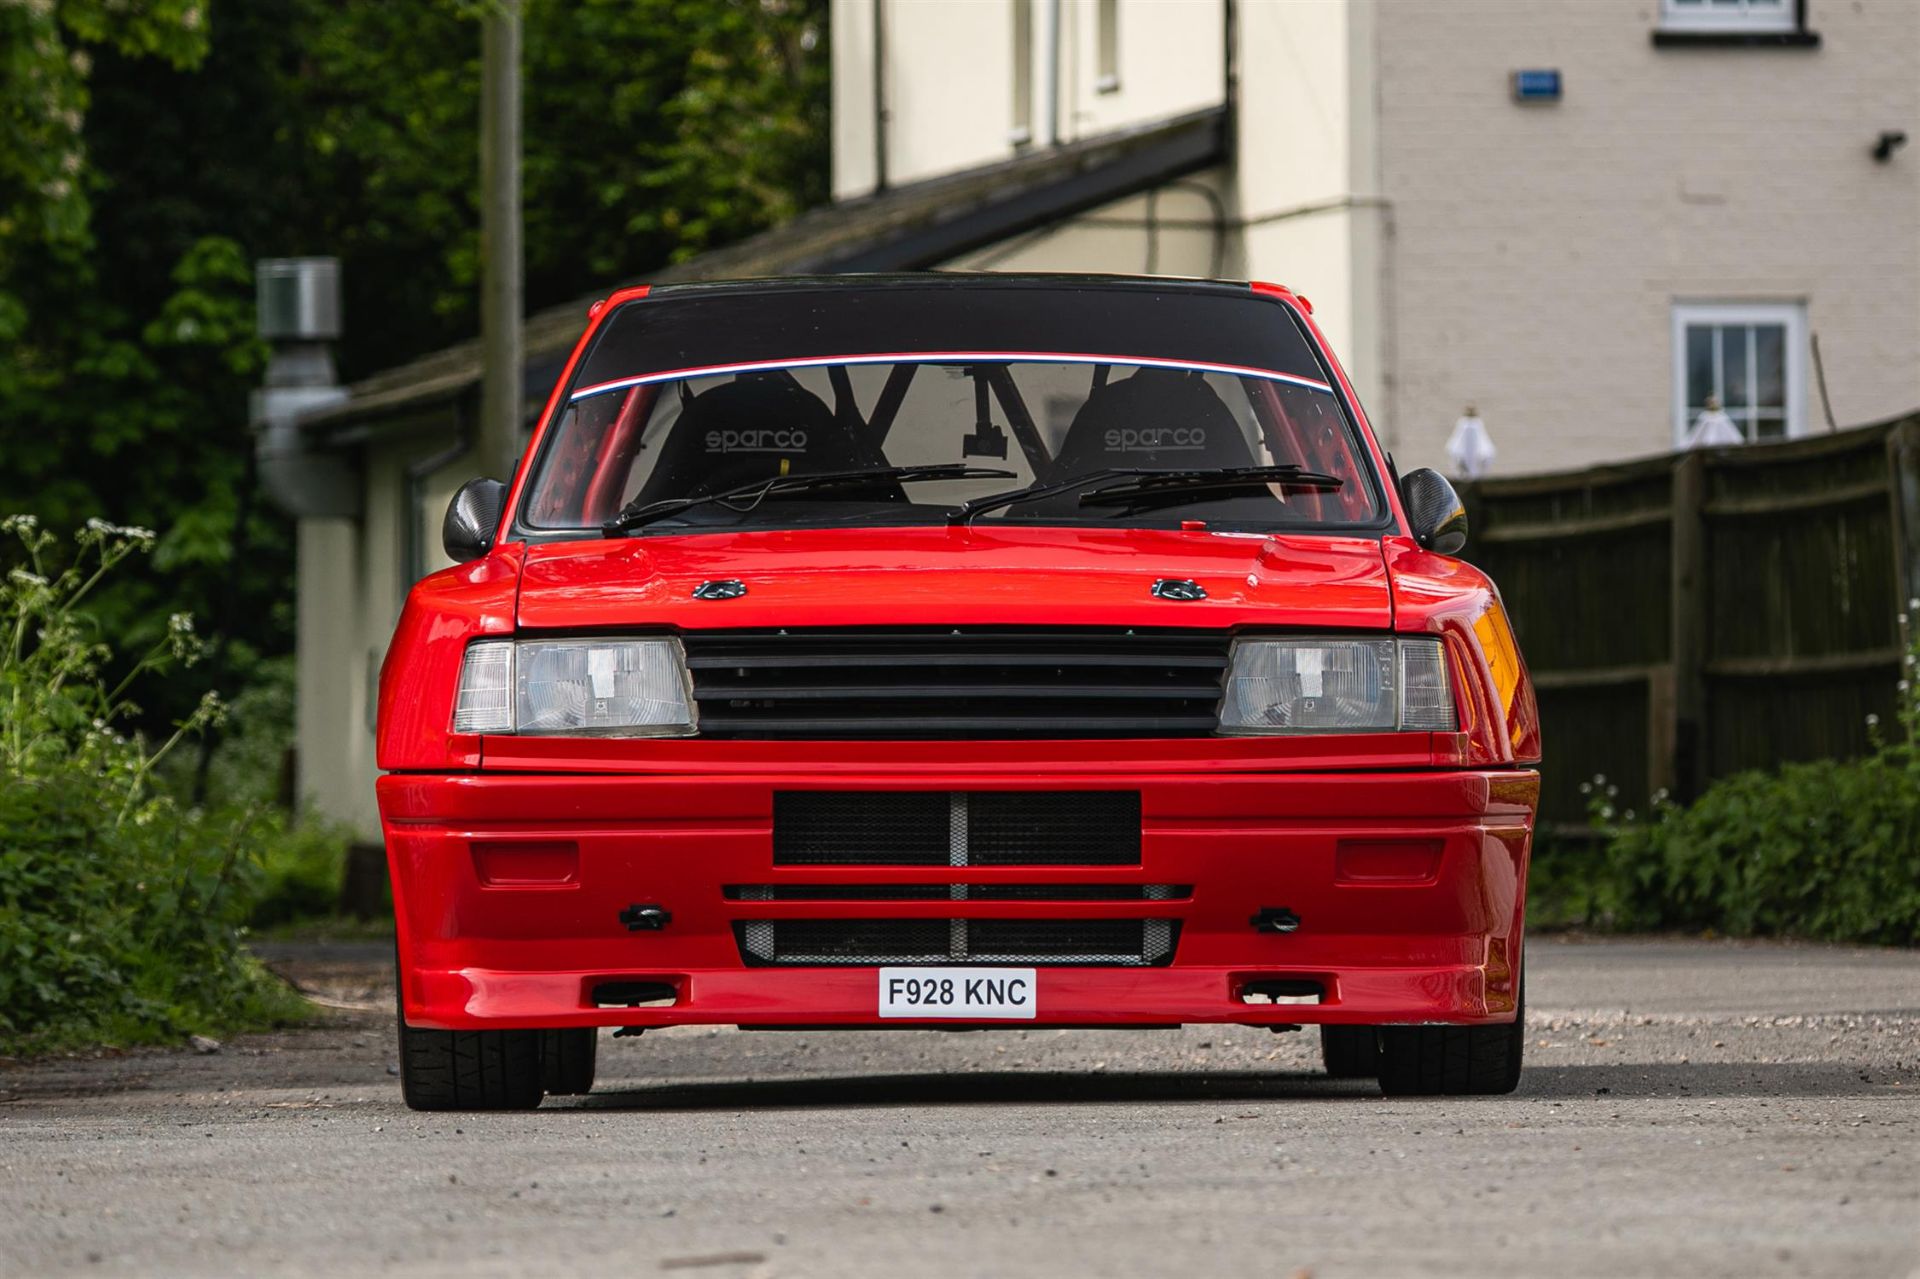 1988 Peugeot 309 GTi 16v Supercharged 'Maxi' Rally Special - Image 6 of 10